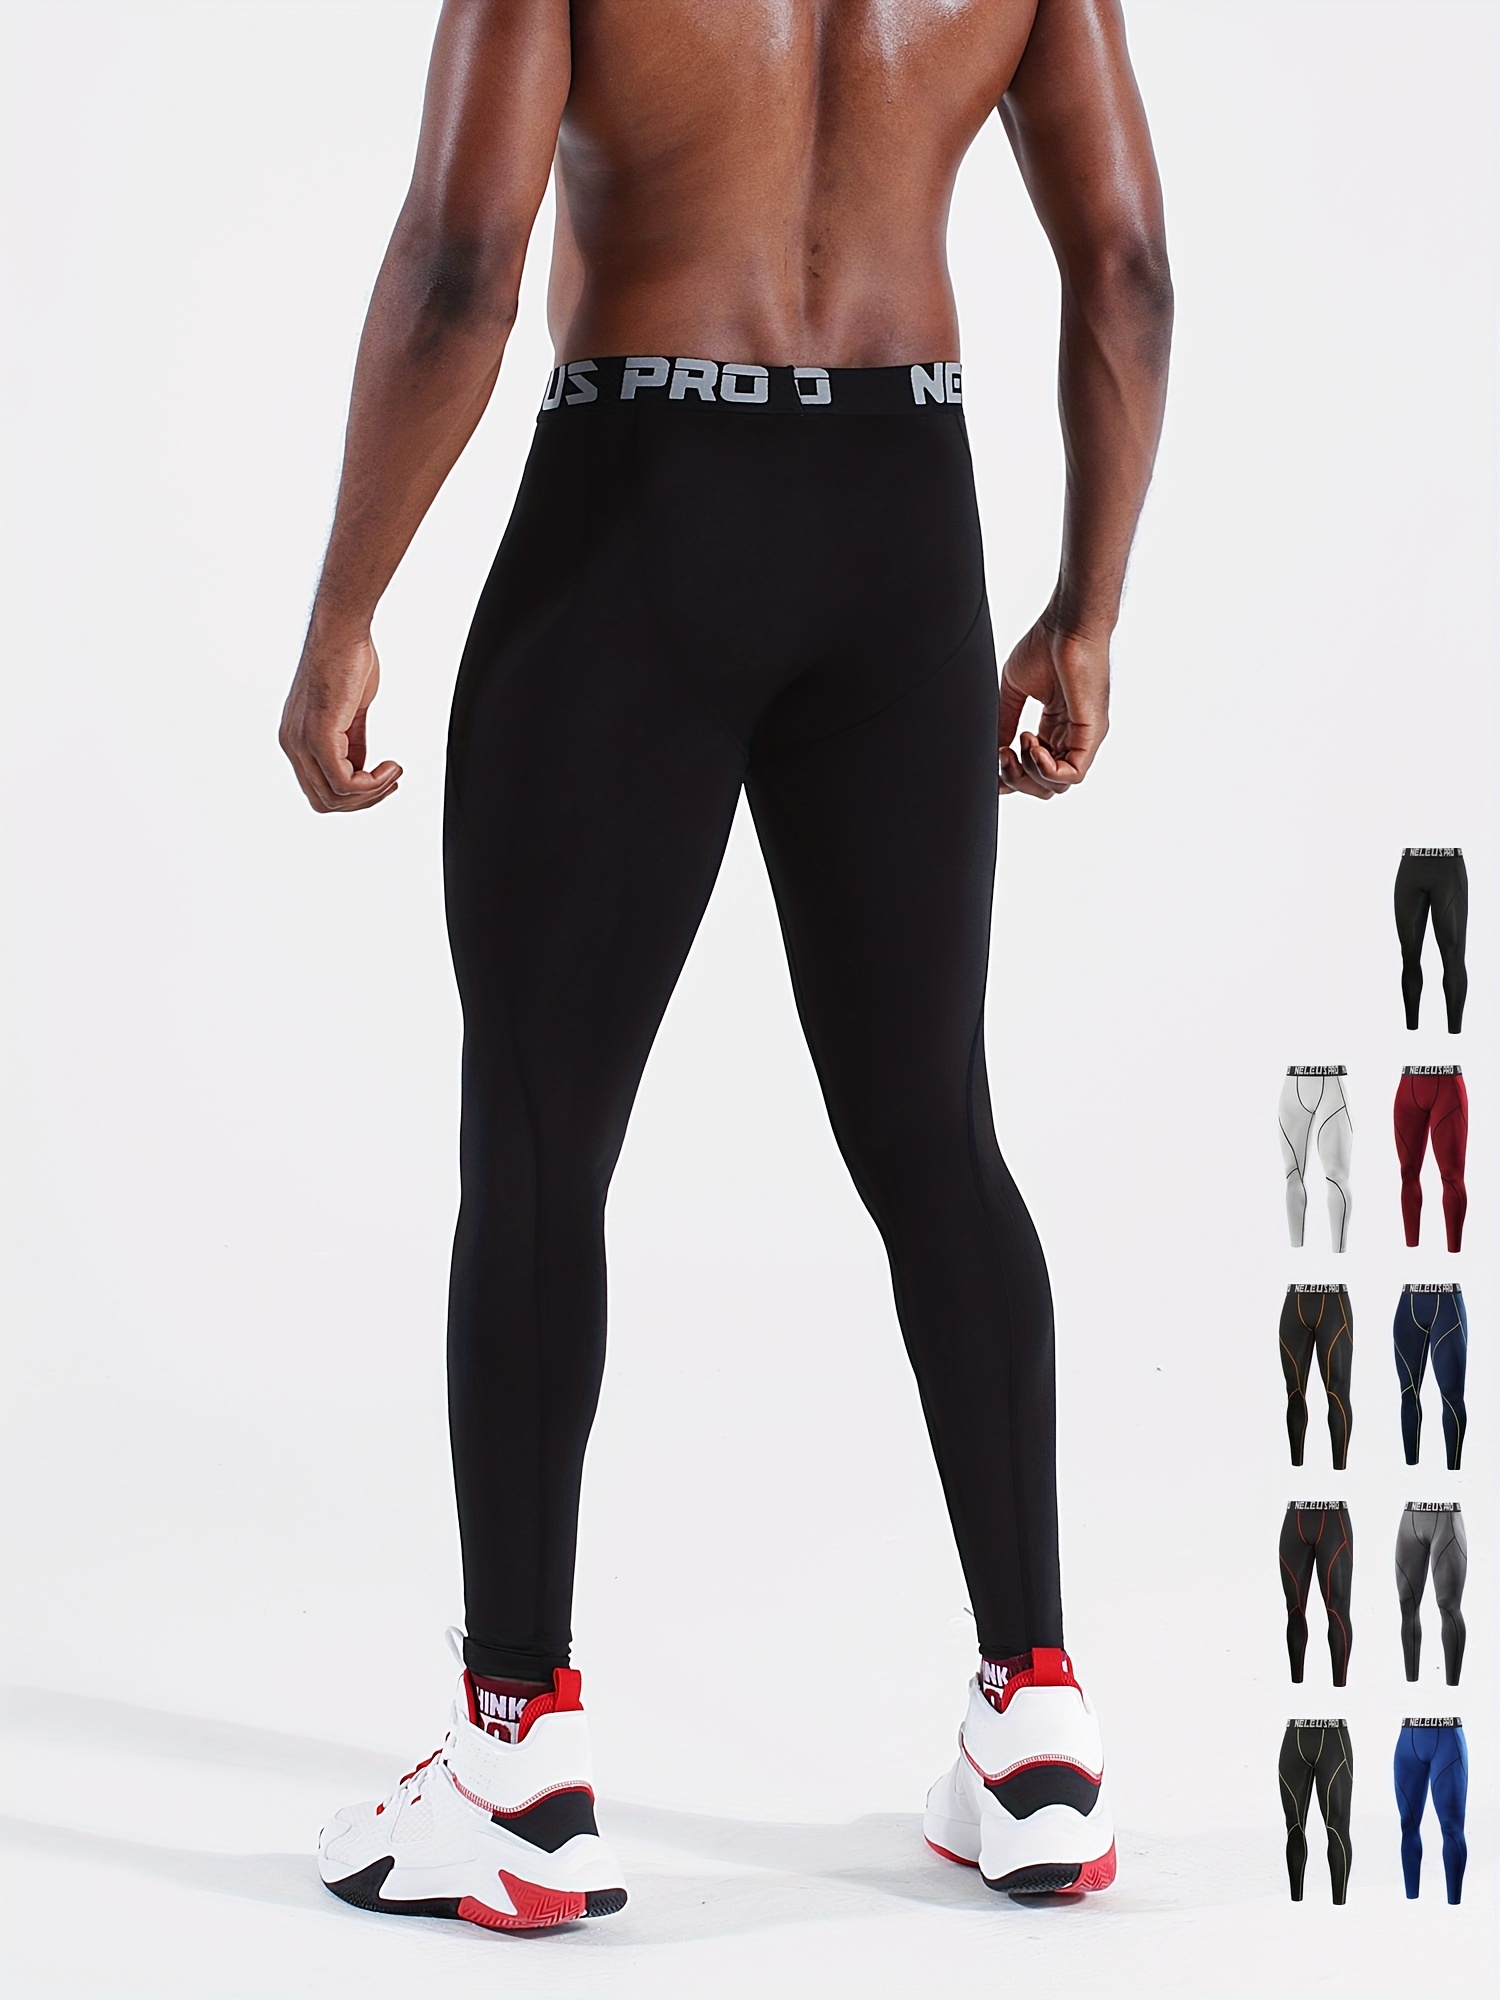 Men's Compression Tight Pants Running Cycling Basketball Soccer